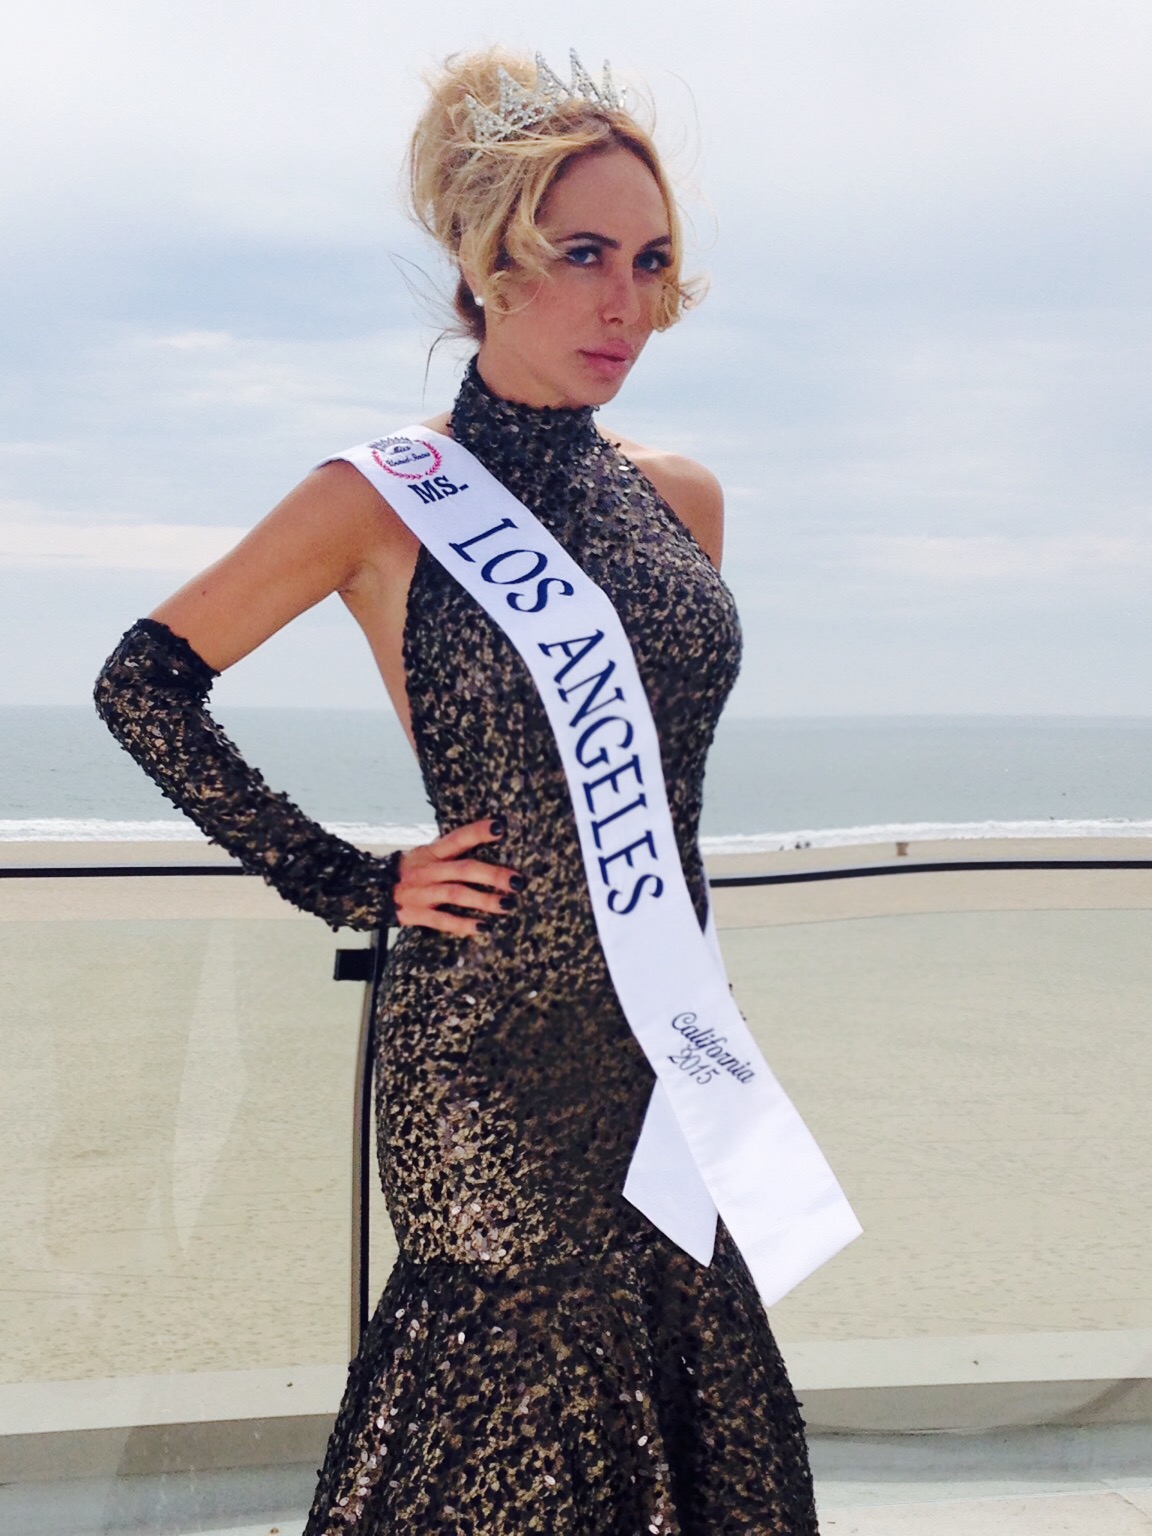 Miss CA/ World dress by Camille Wood